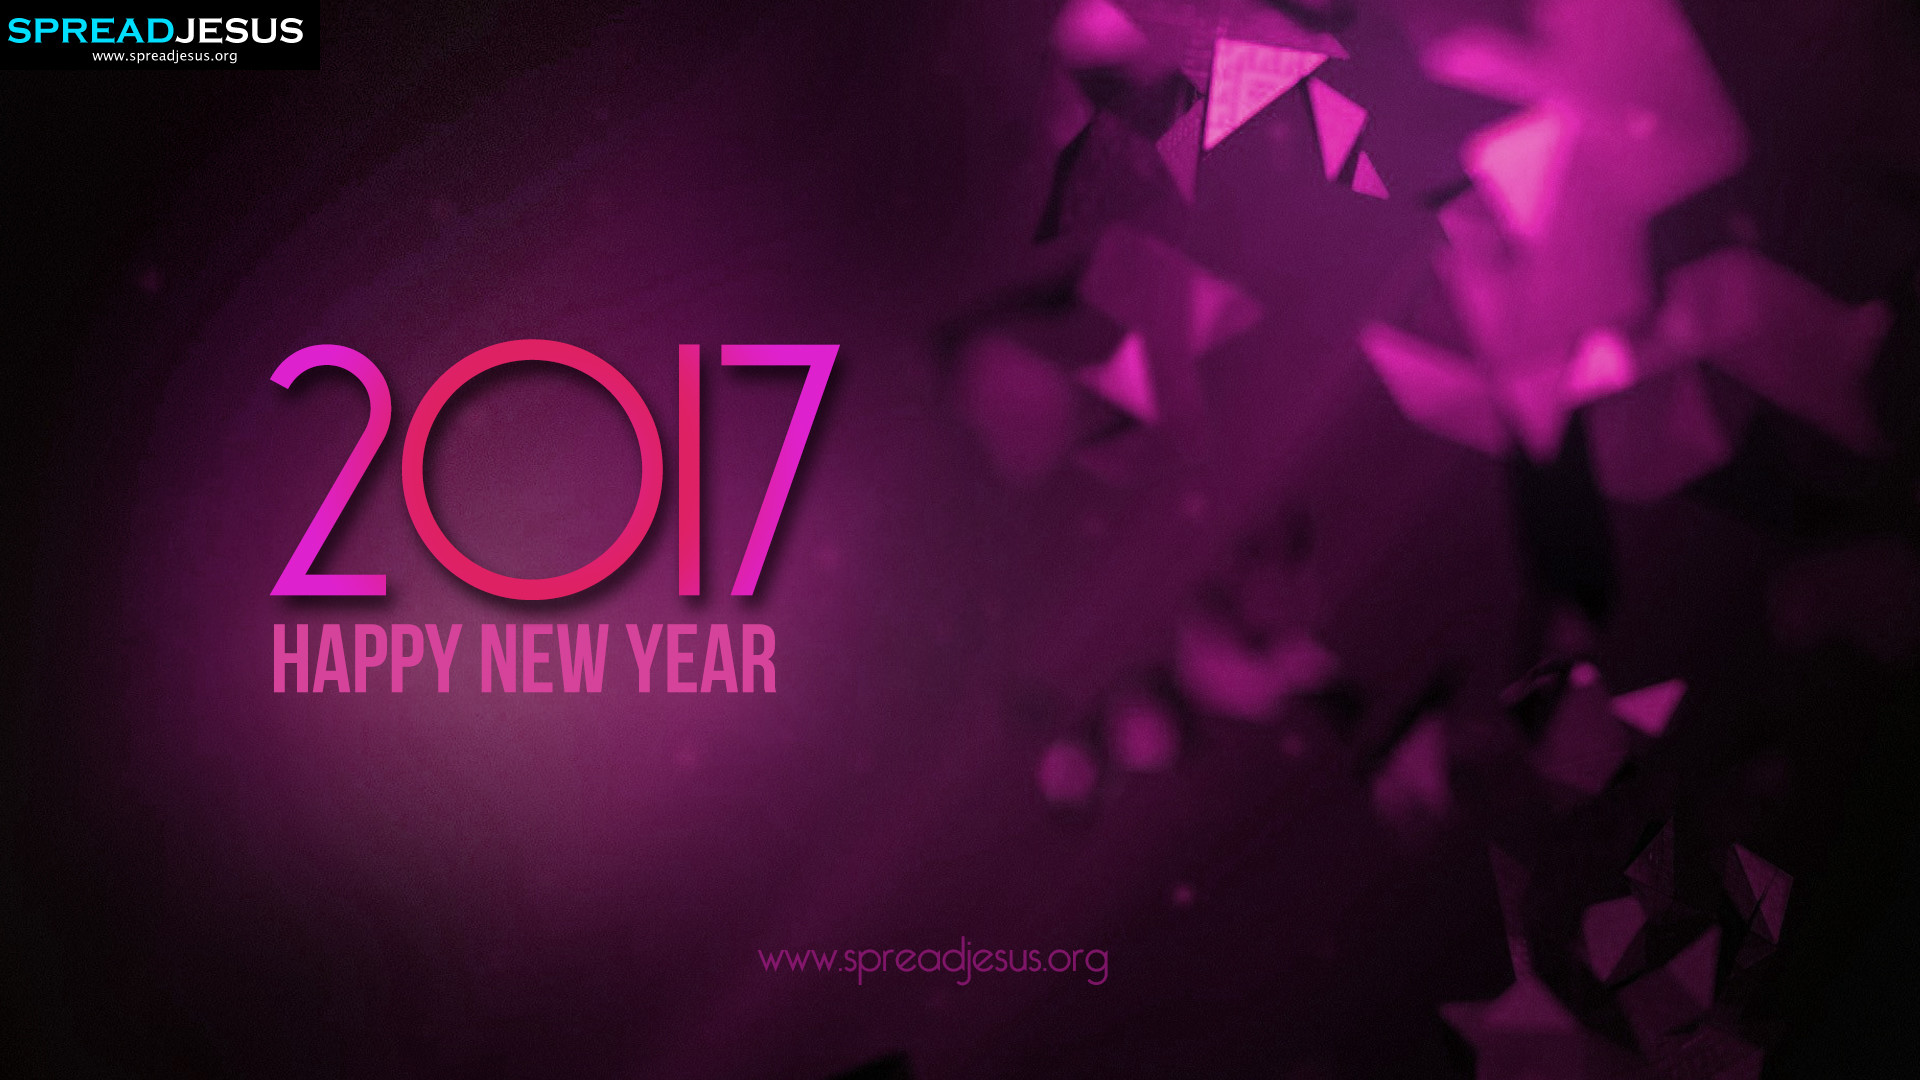 1920x1080 Happy New Year 2017 Greetings Wishes HD-Wallpapers Free  DownlOADING-spreadjesus.org